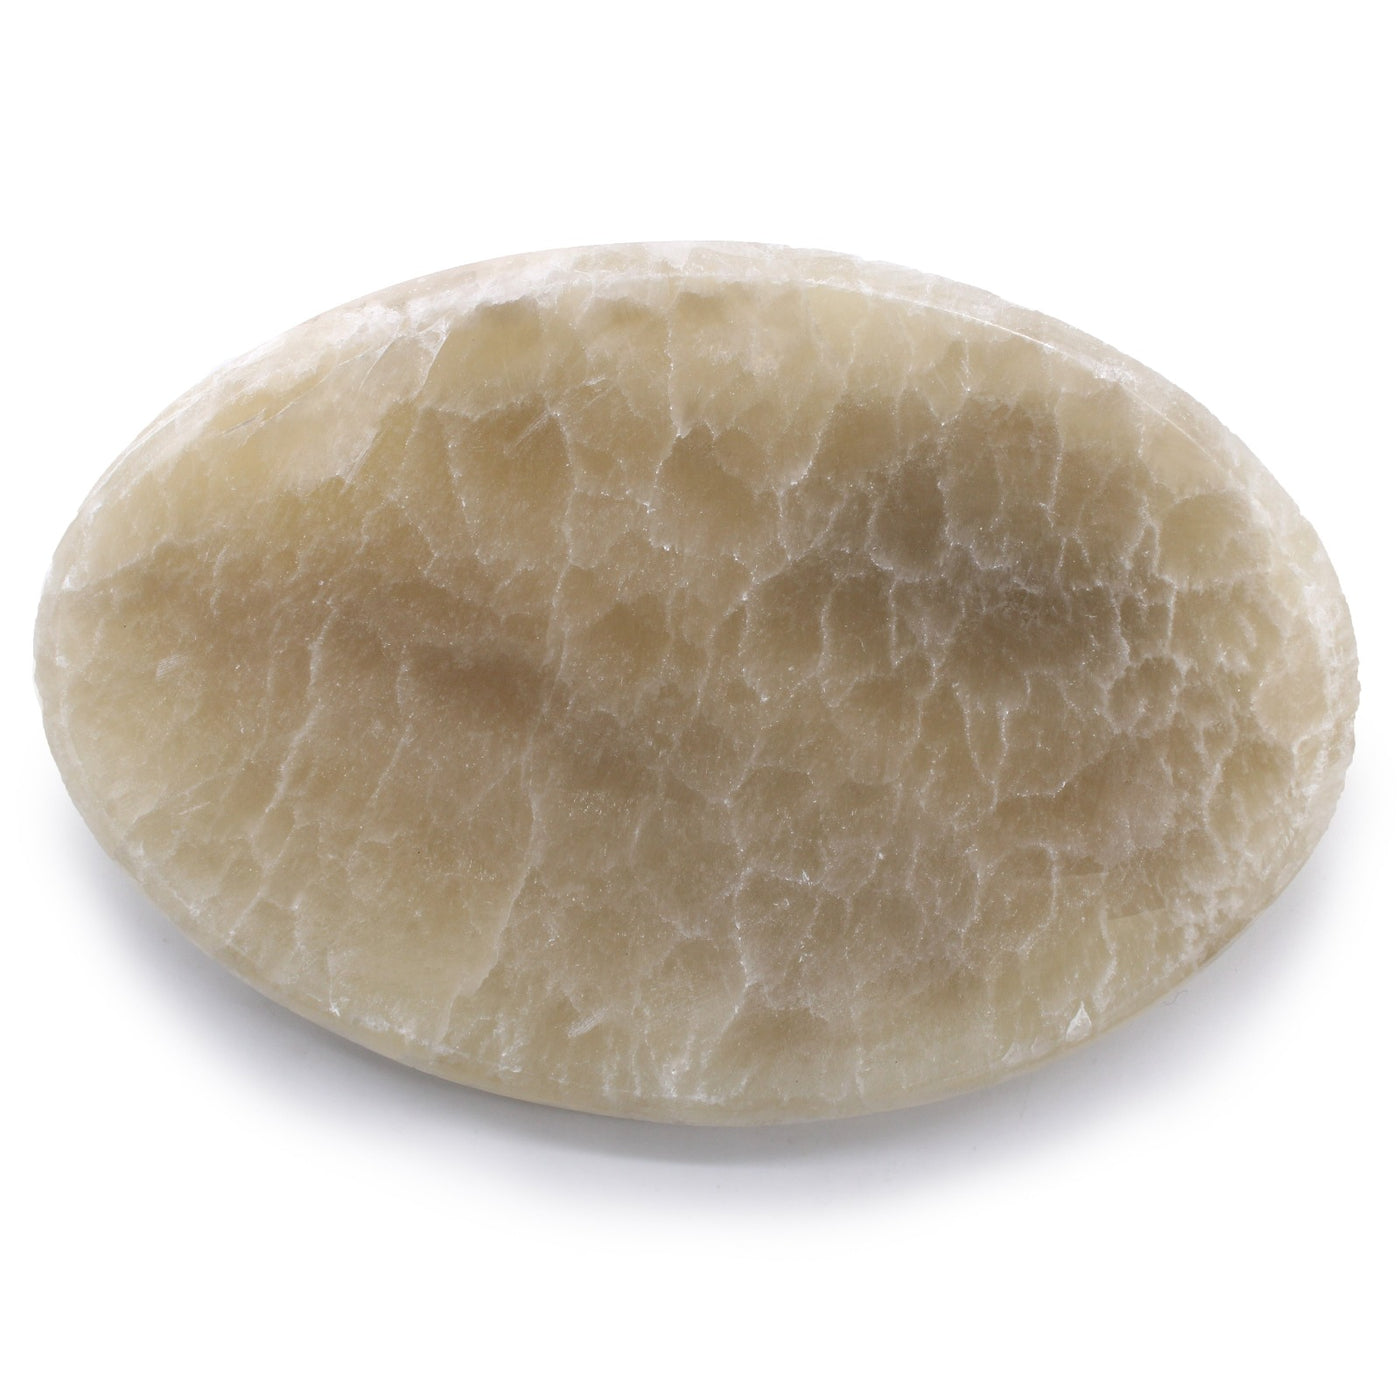 Onyx Stone Soap Dish In Oval Shape.